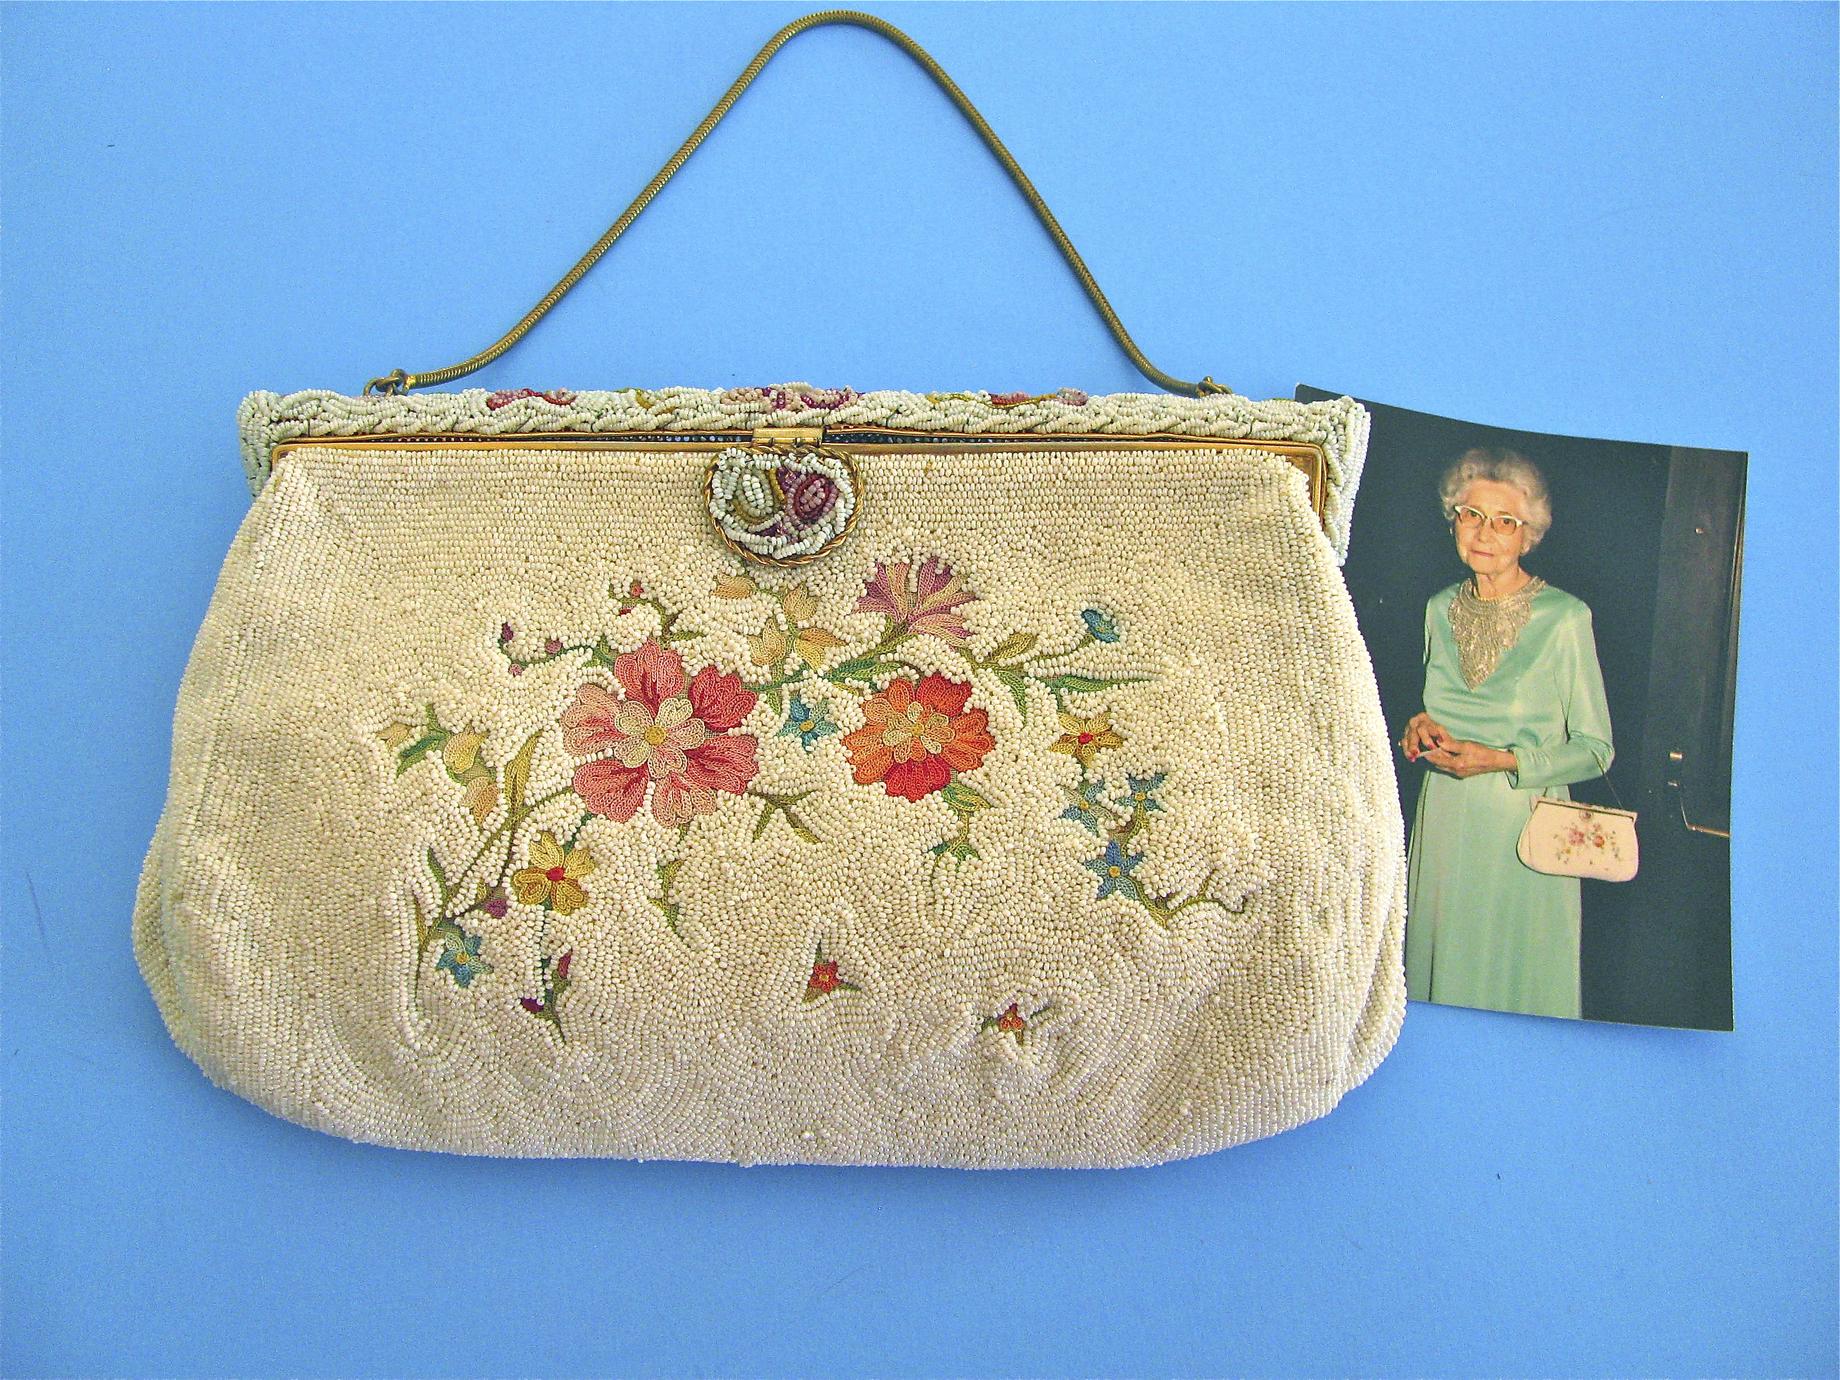 White beaded evening bag with tambour embroidery - UWDC - UW-Madison  Libraries